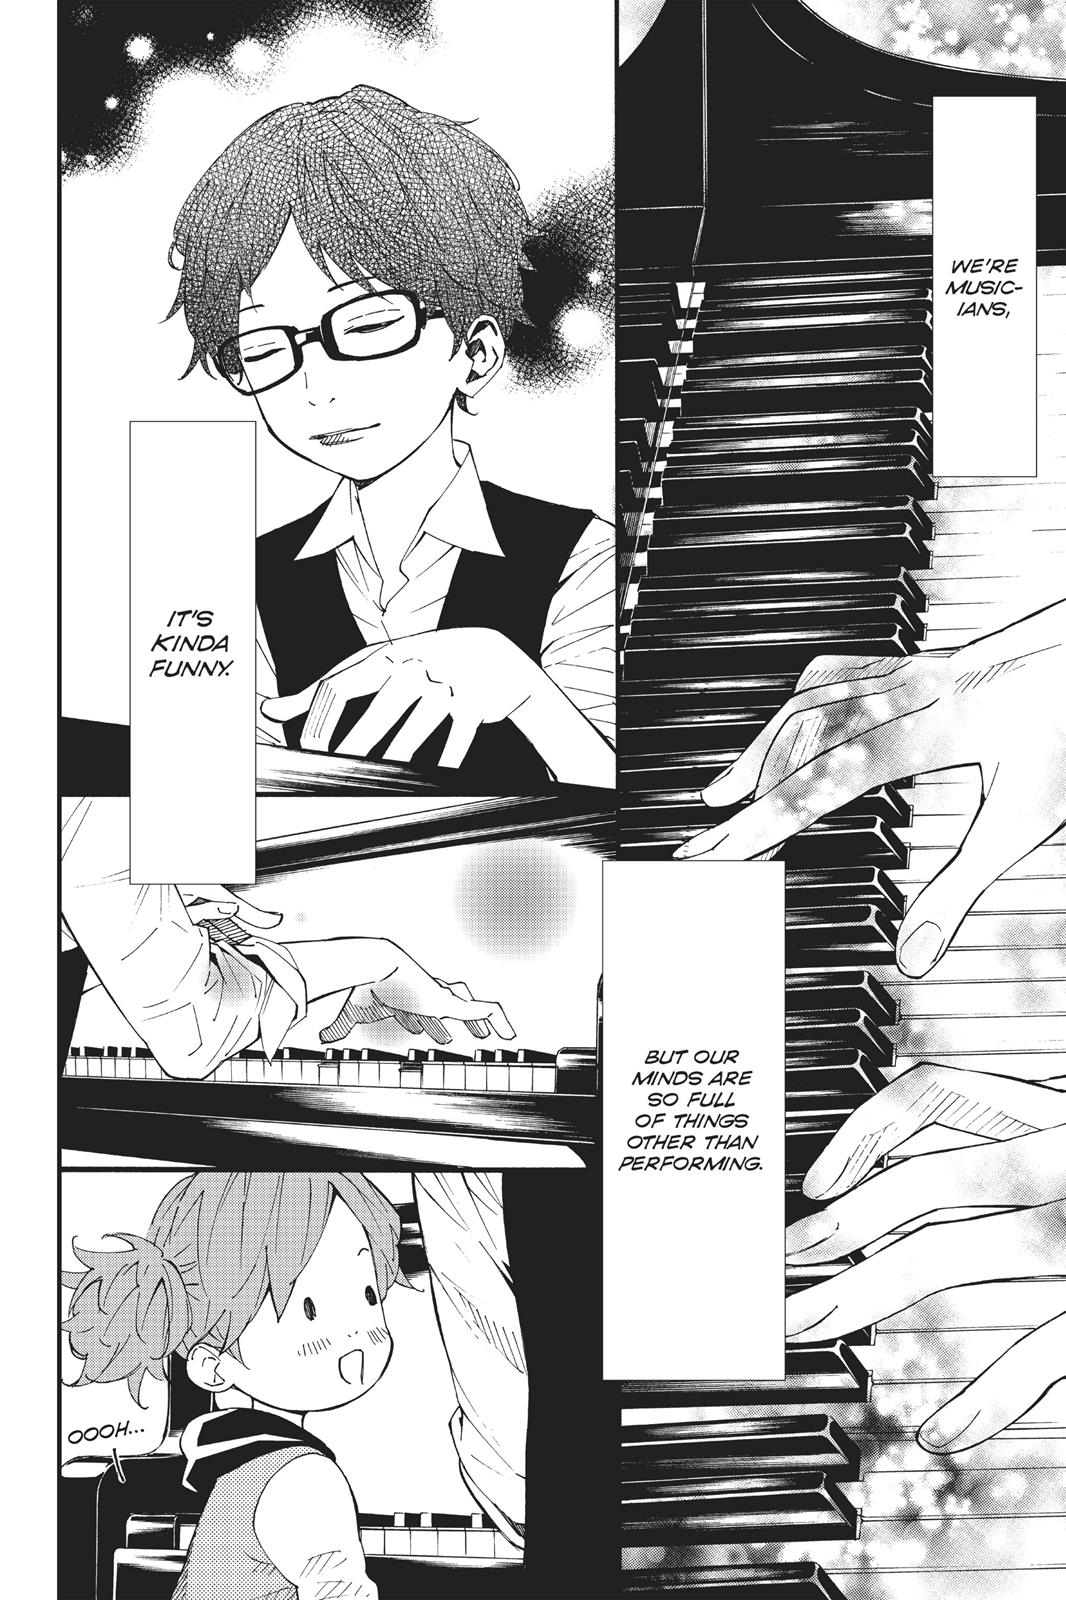 Your Lie in April, Chapter 44 - Your Lie in April Manga Online